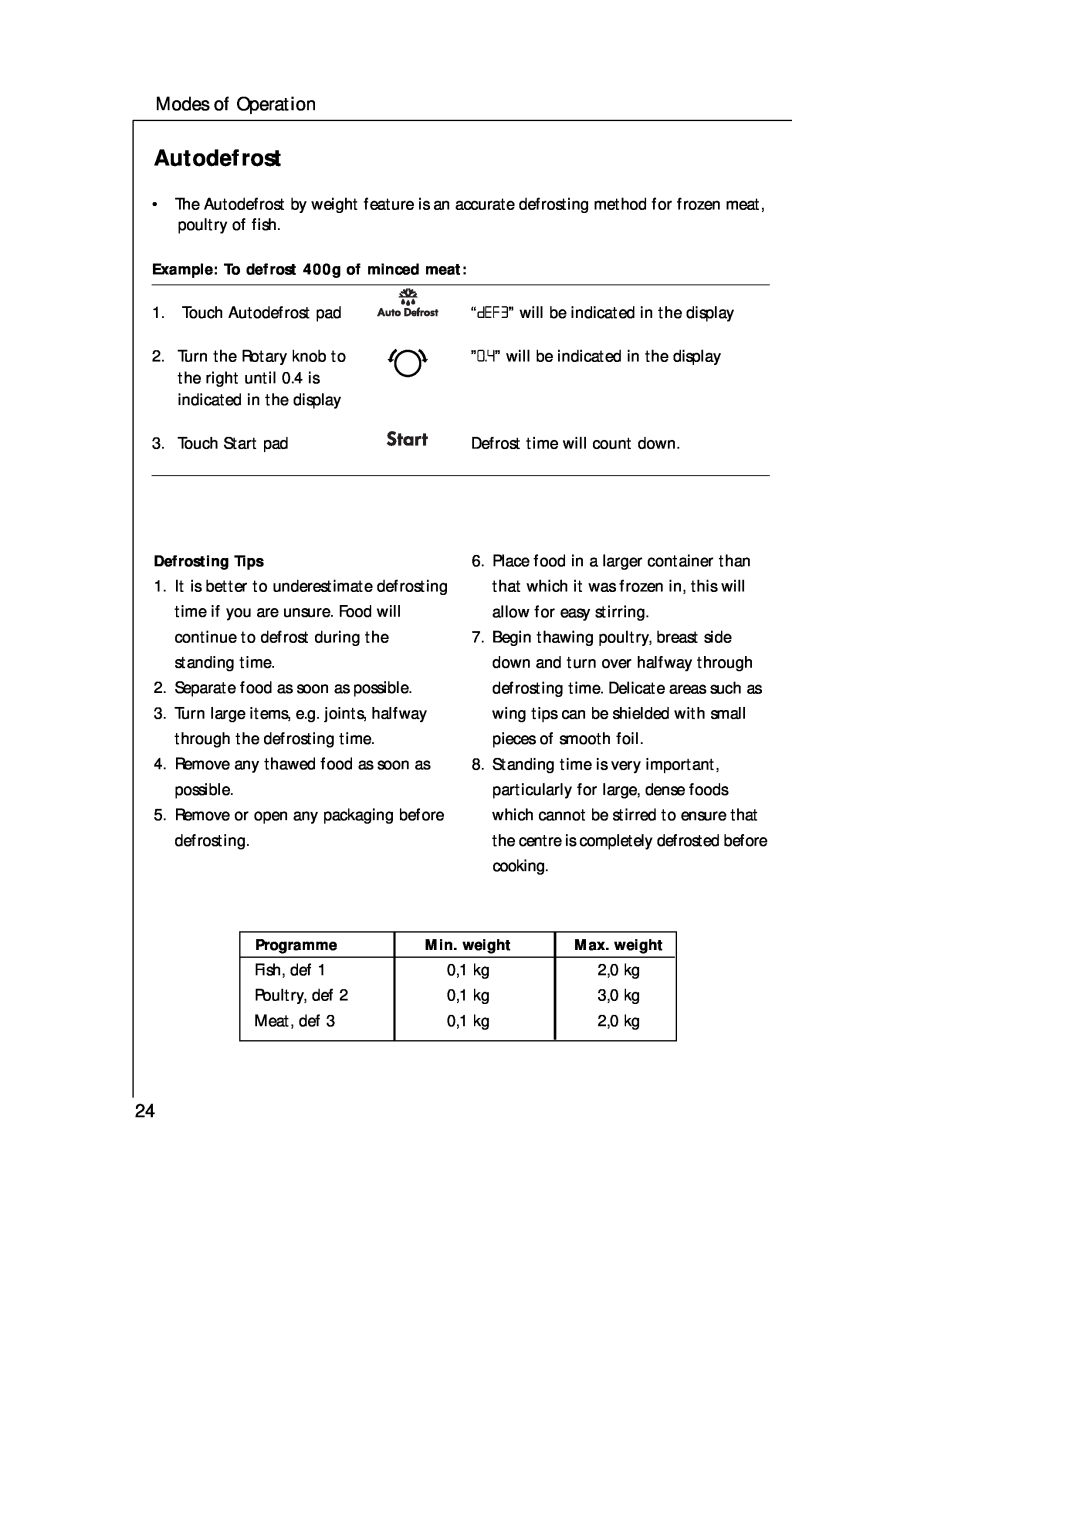 AEG MCD_274 manual Autodefrost, Example To defrost 400g of minced meat, Defrosting Tips, Programme, Min. weight 